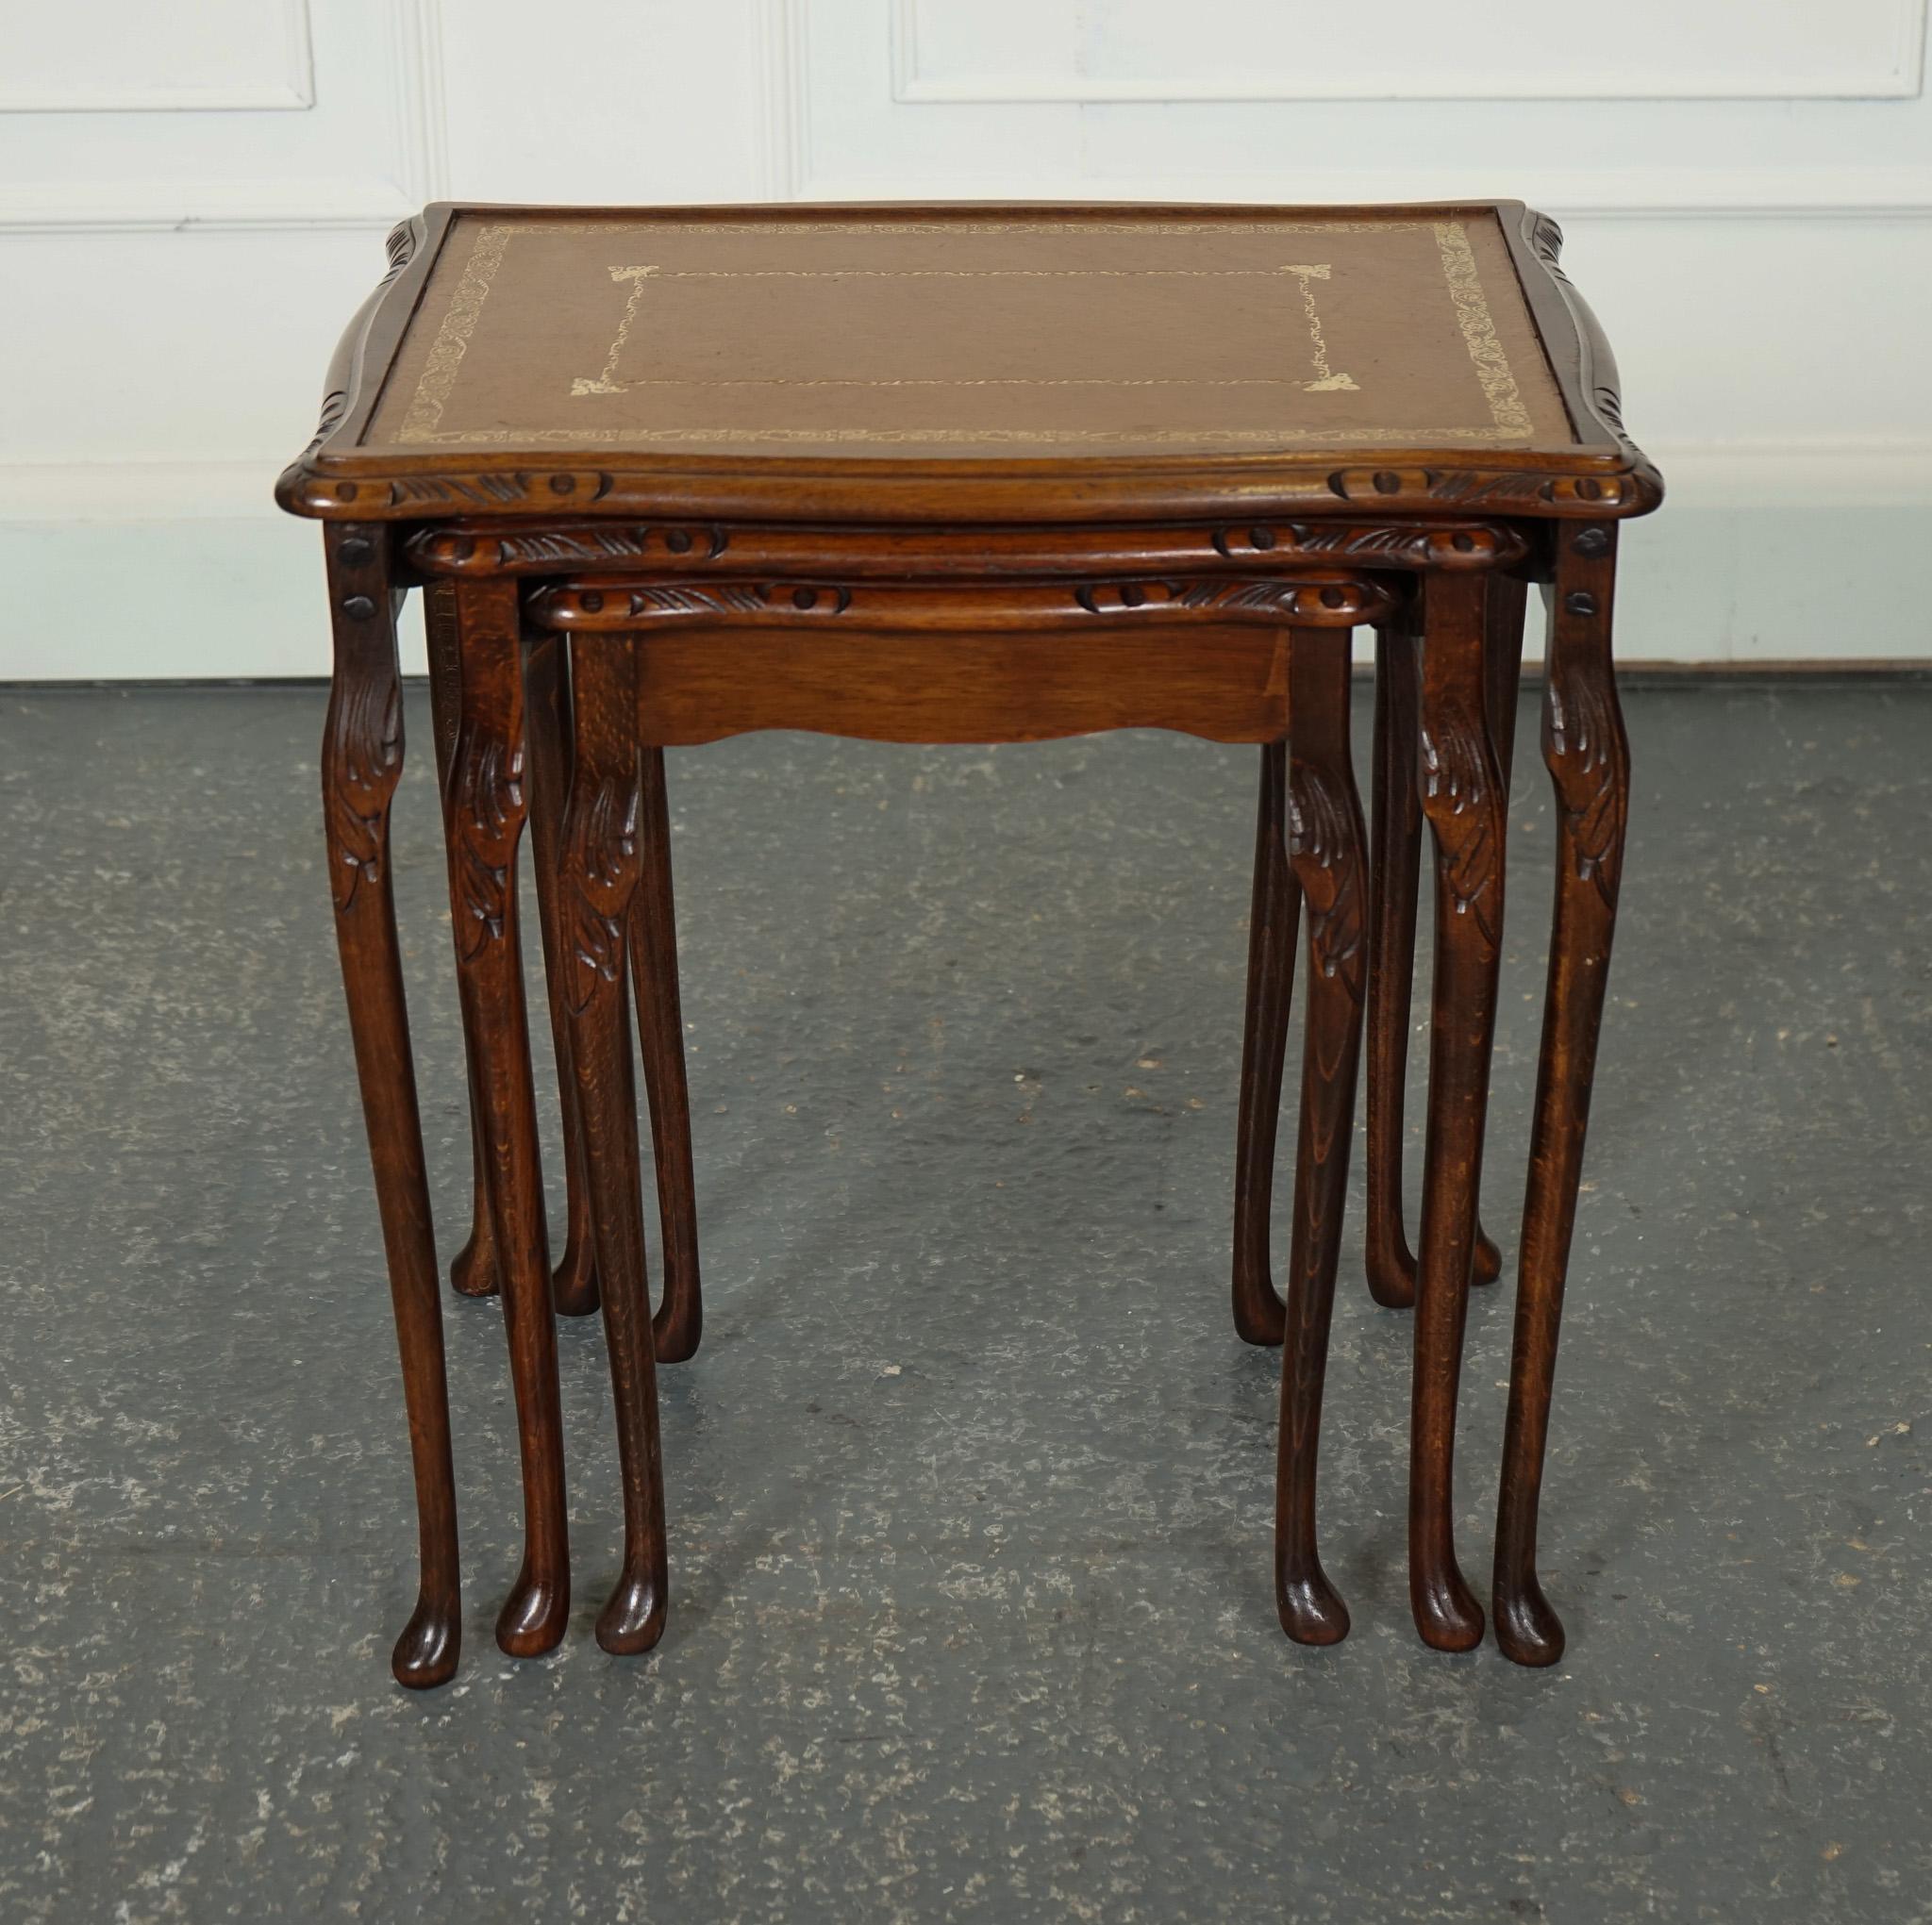 20th Century VINTAGE NEST OF TABLES QUEEN ANNE STYLE LEGS WiTH BROWN EMBOSSED LEATHER TOP J1 For Sale